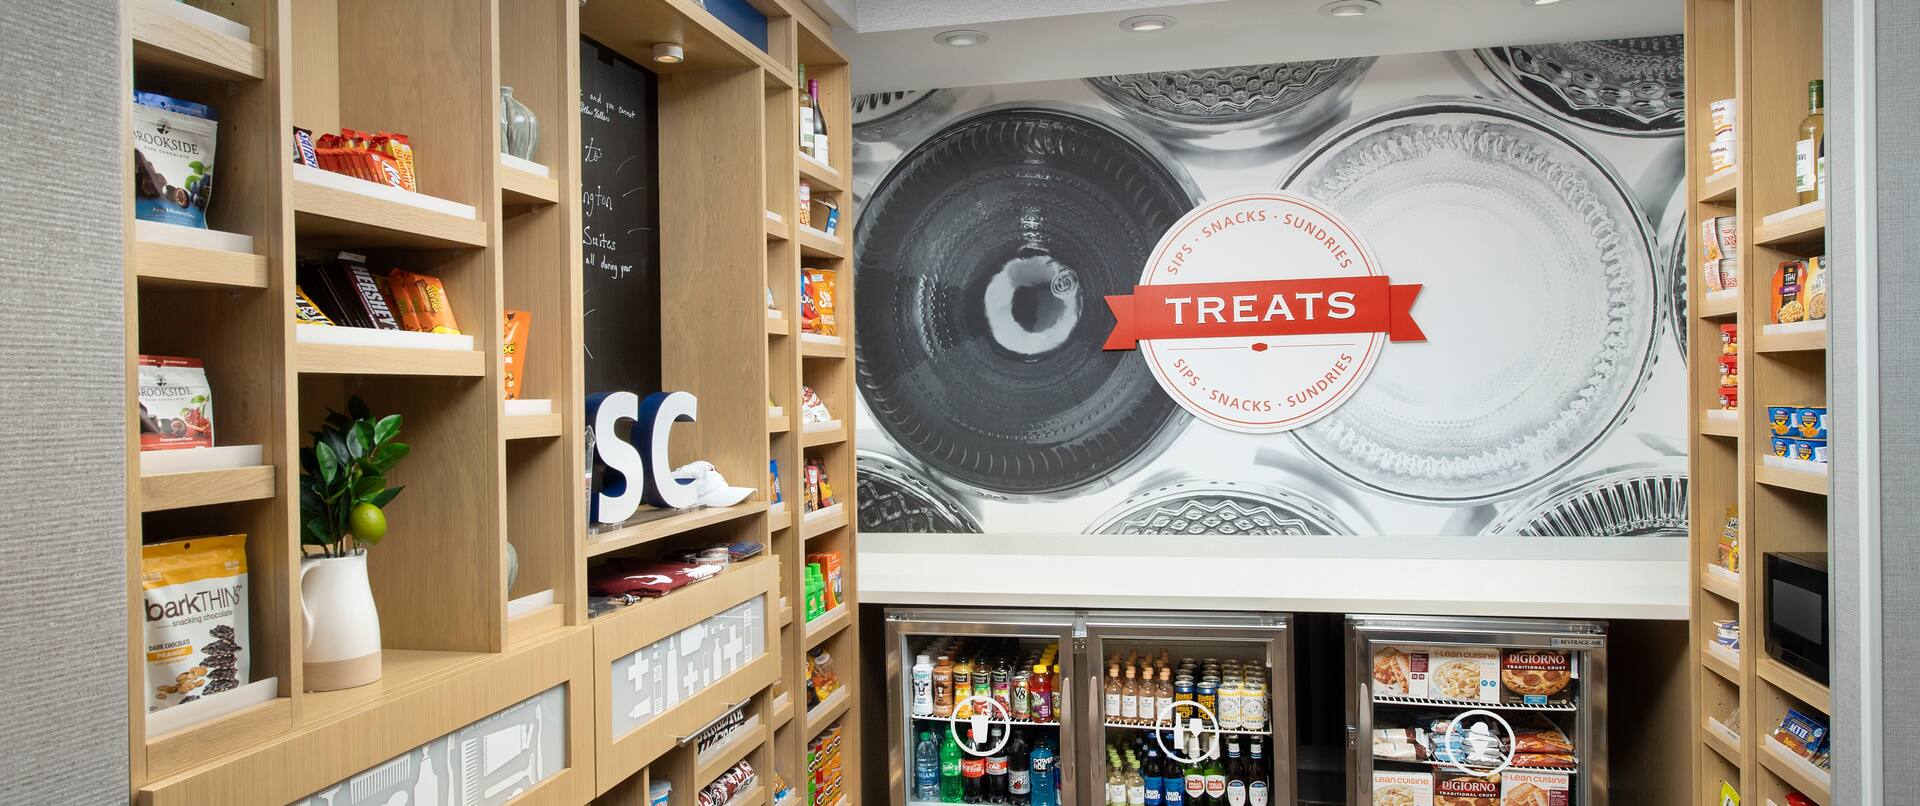 Treats Shop with Drinks and Snacks